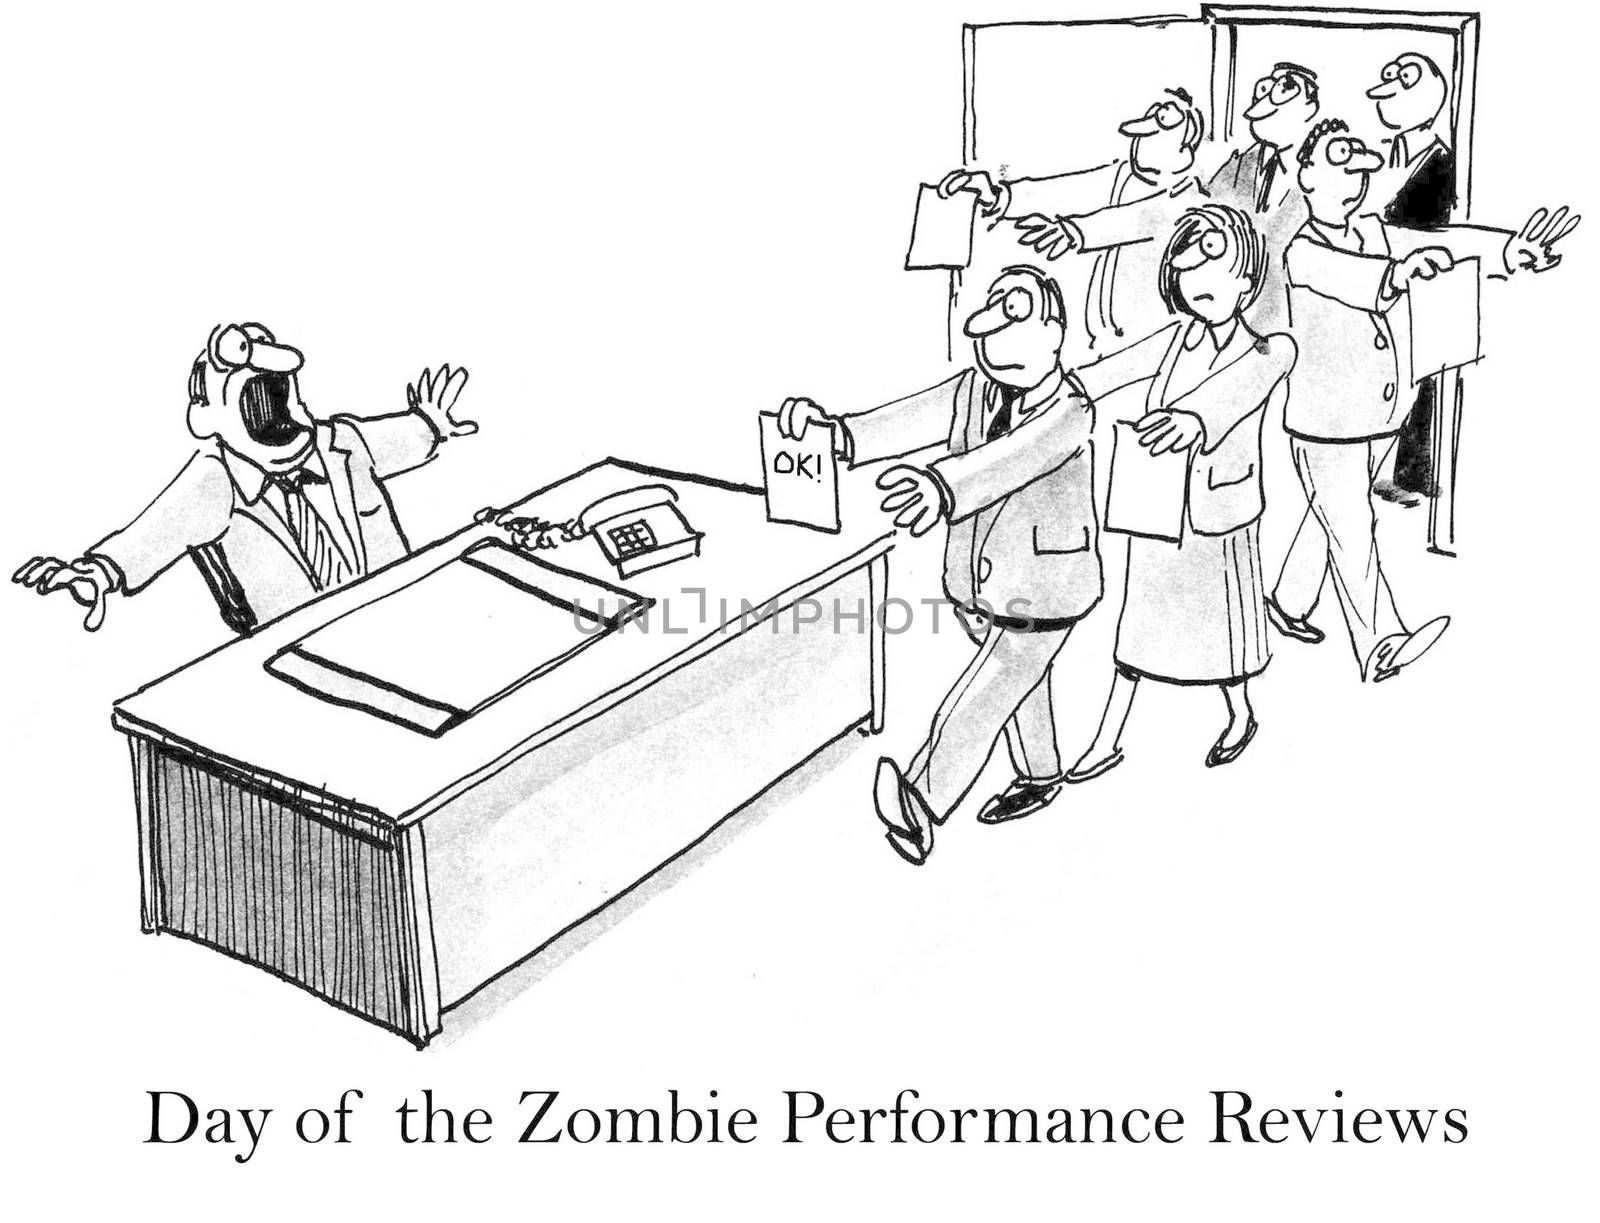 Performance Reviews by andrewgenn